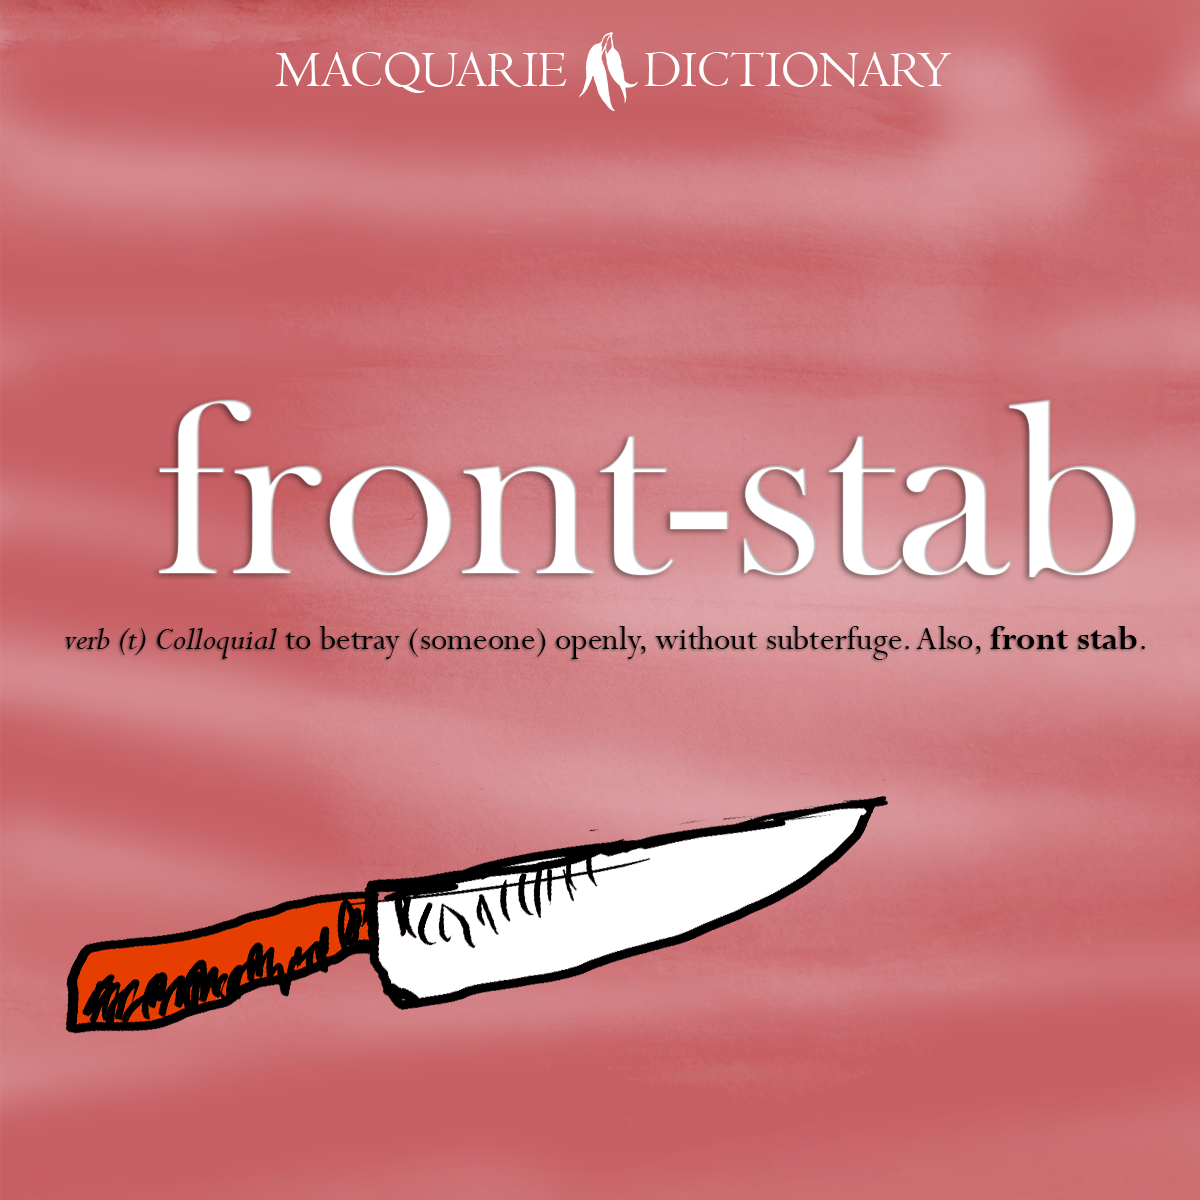 Word of the Year 2021 - front-stab